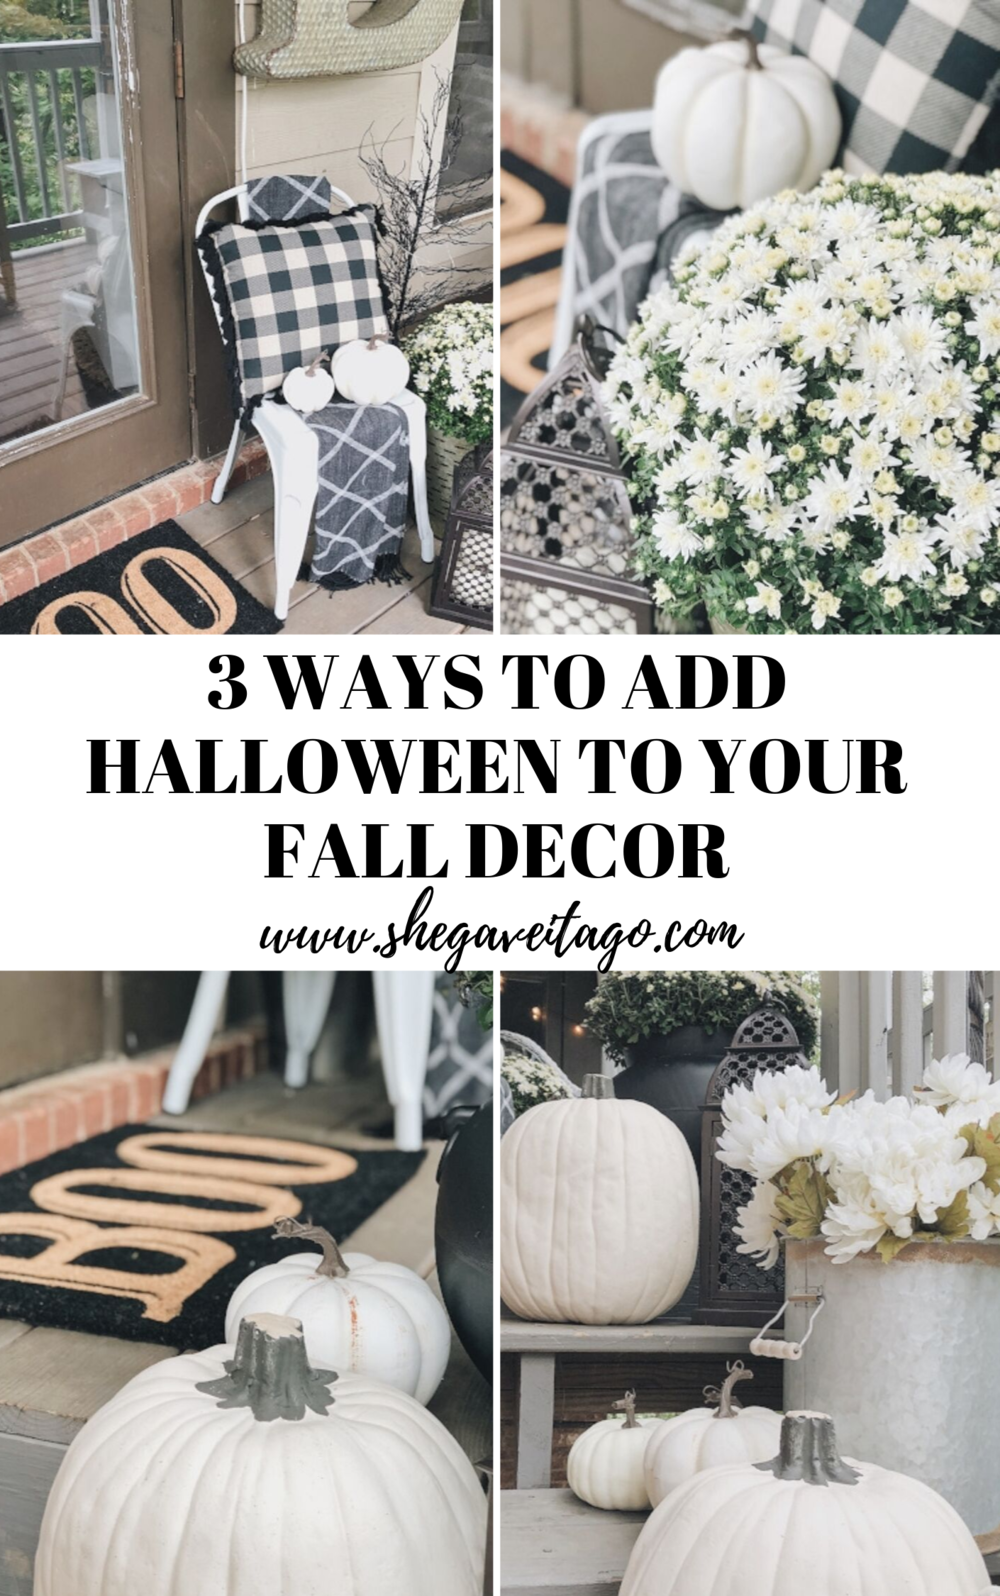 3 Ways To Add Halloween To Your Fall Decor.png